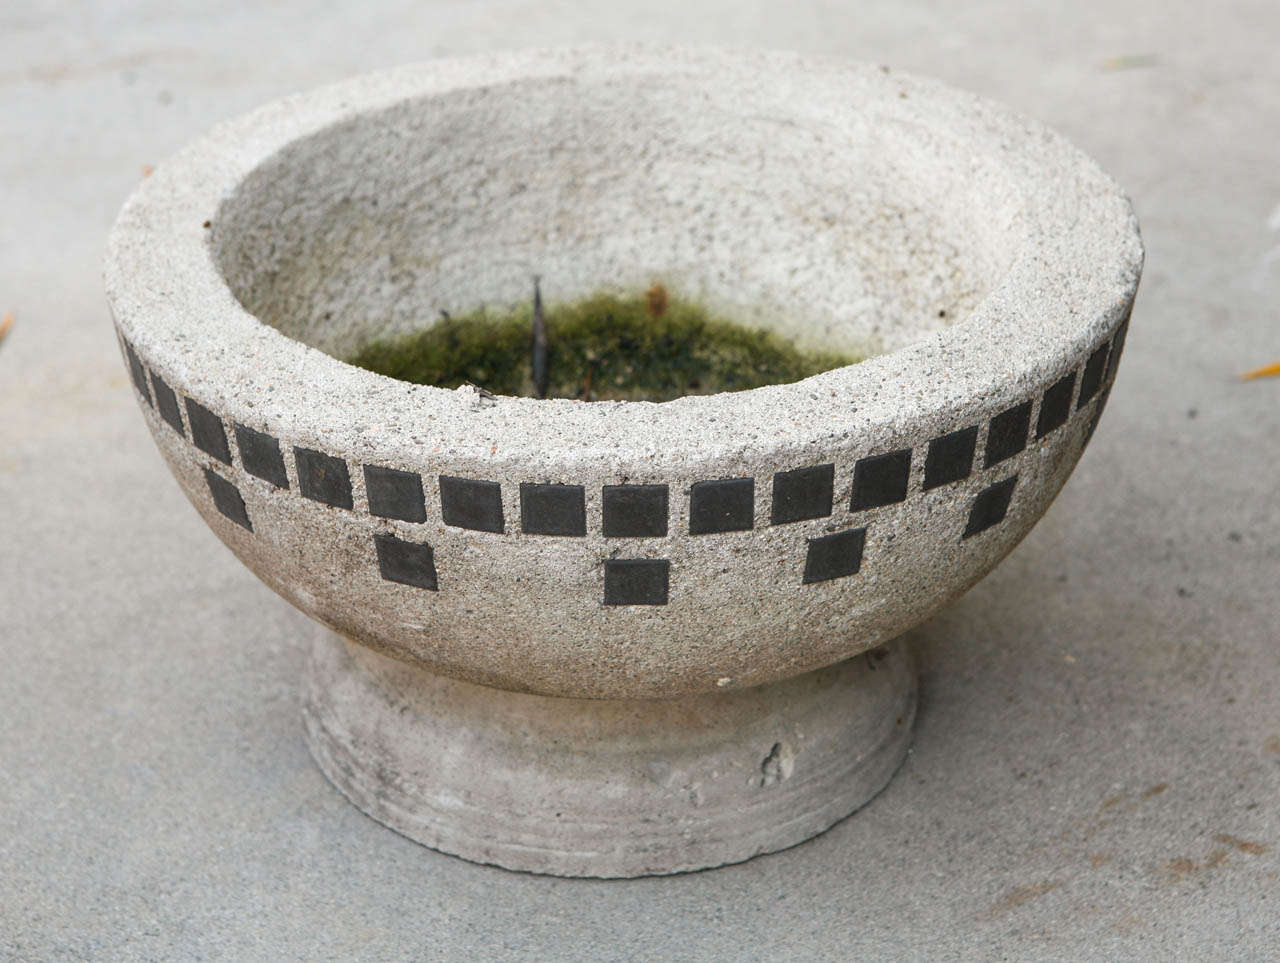 These wonderful cement planters are similar to Roadside Pottery. From what I have heard they are from the same era. One of the planters is not attached to the base. One has a chip and is missing a tile as pictured. Once planted it would not show.